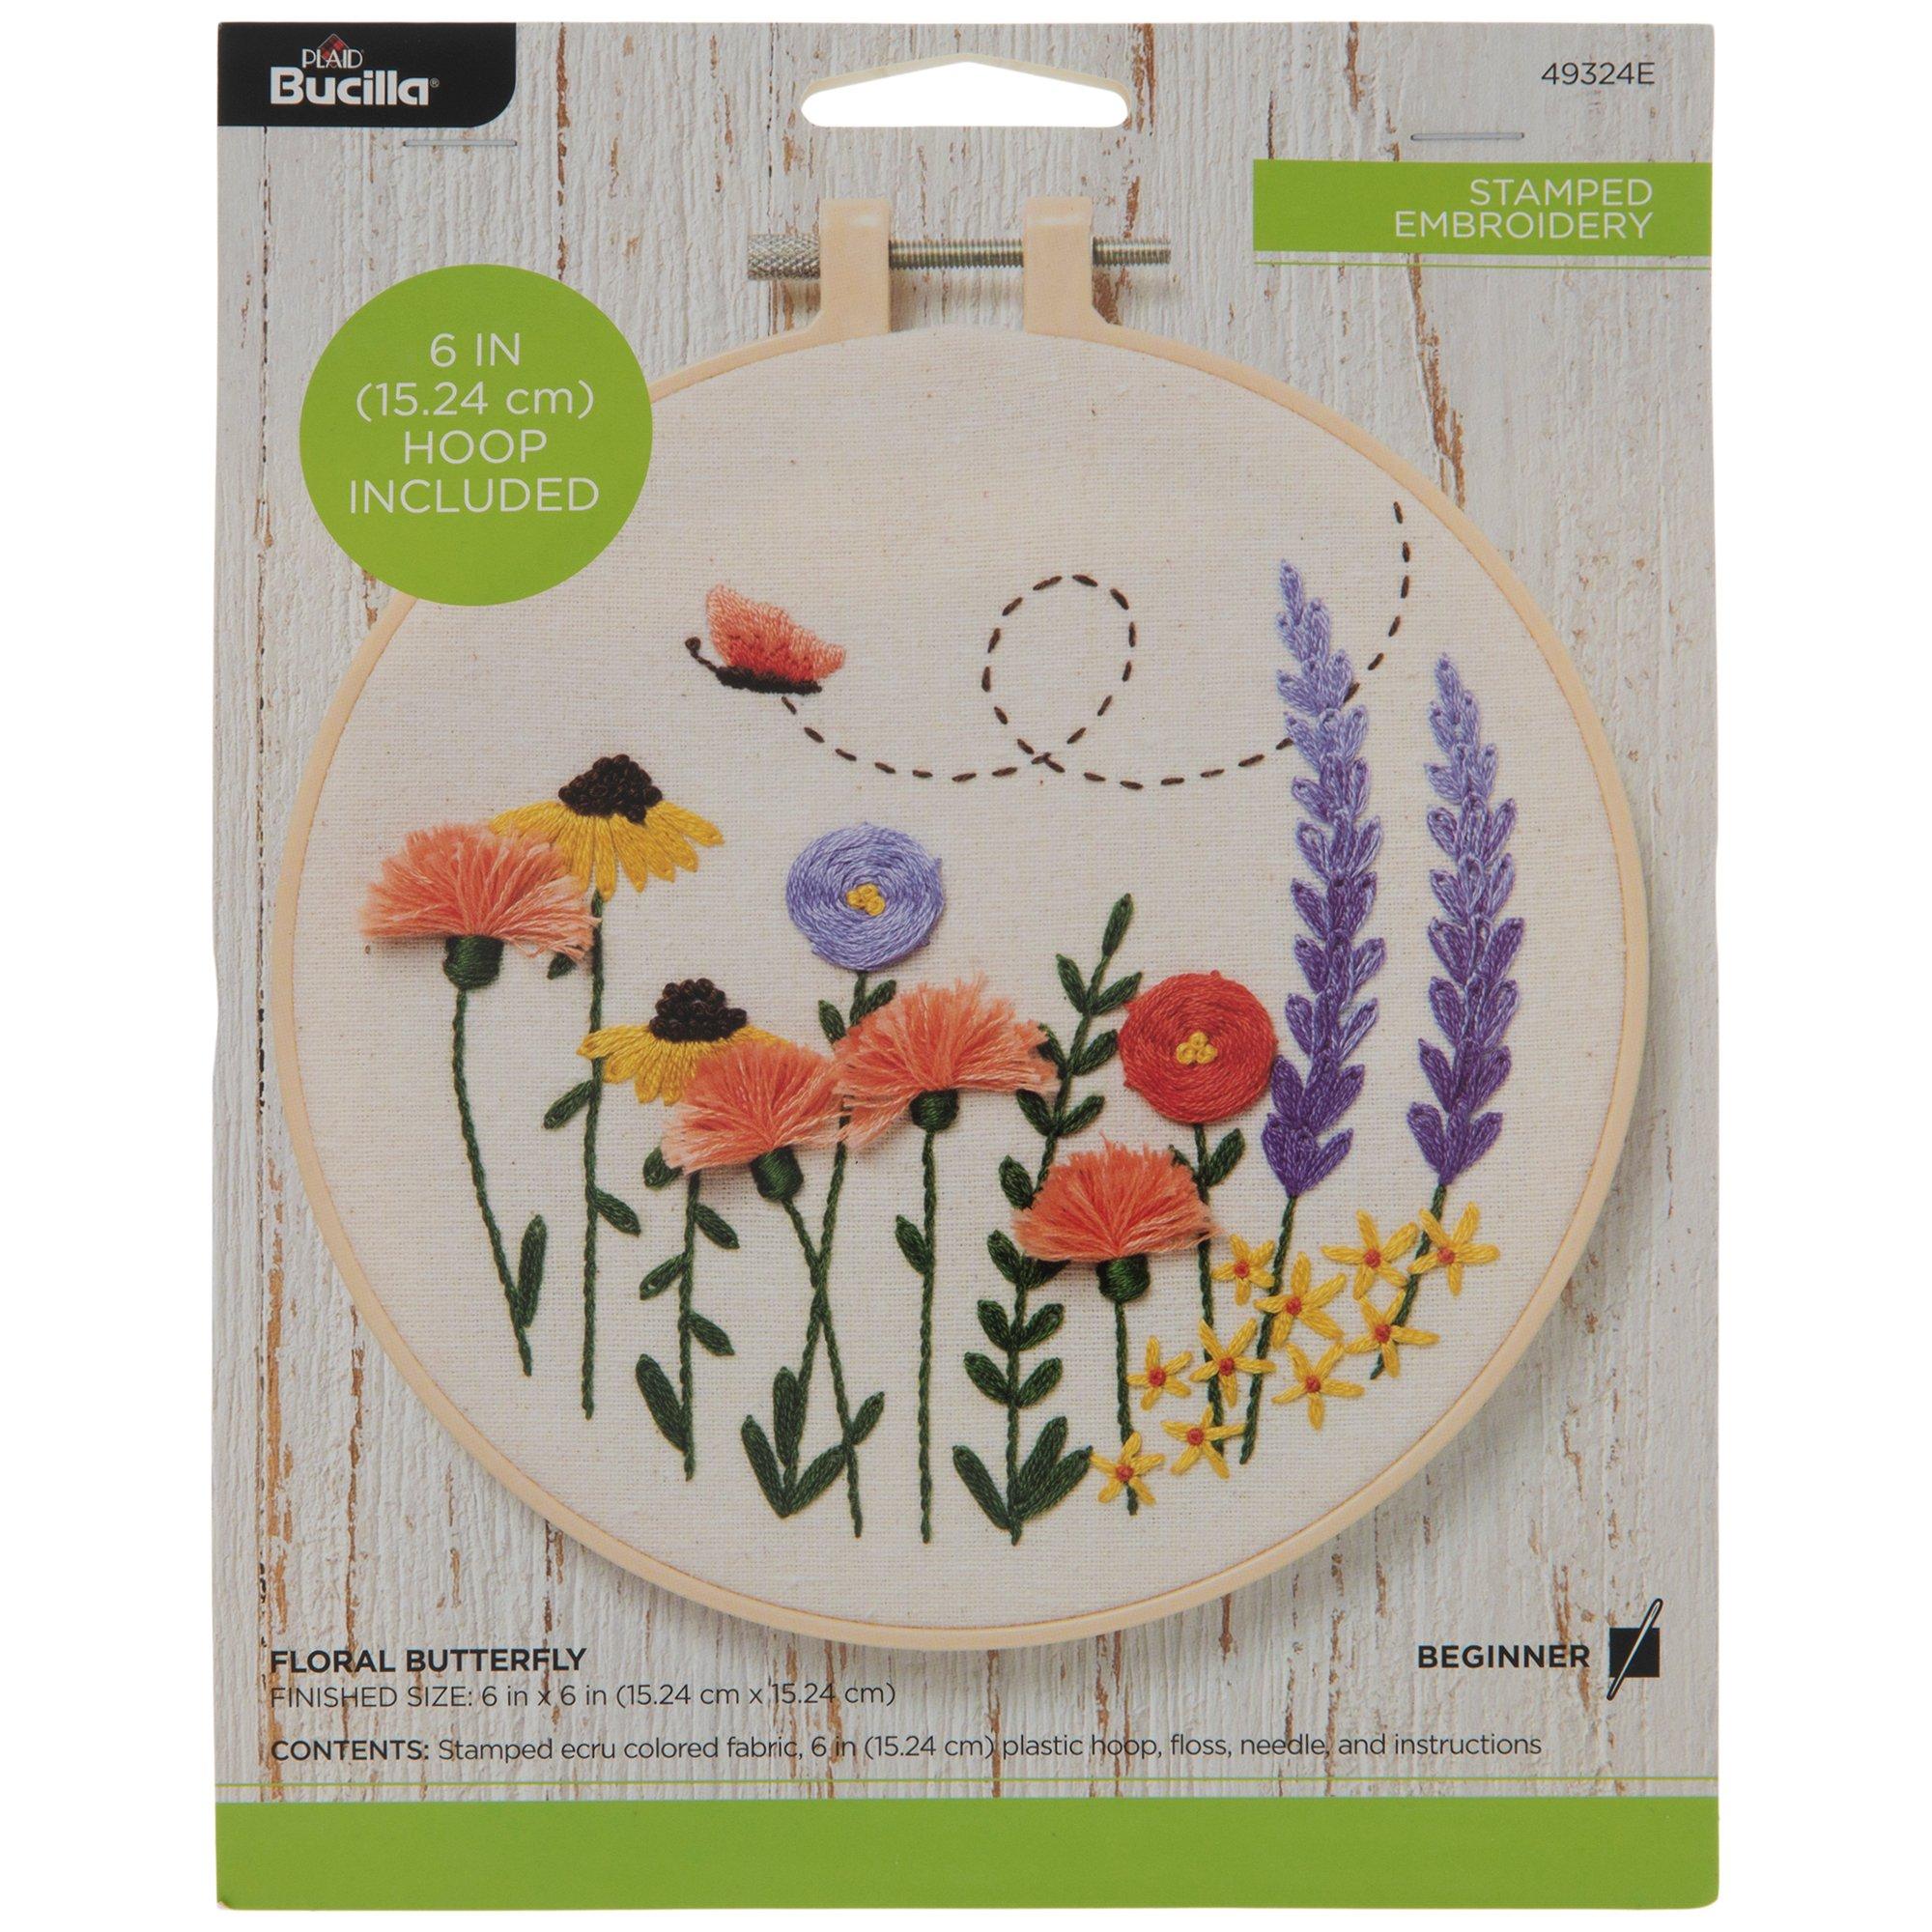 Embroidery Kit 6 Lavender Haze V2 - Embroidery Kit For Beginners -  Embroidery Kit For Adults - Cross Stitch Kits - Cross Stitch Kits For  Beginners 